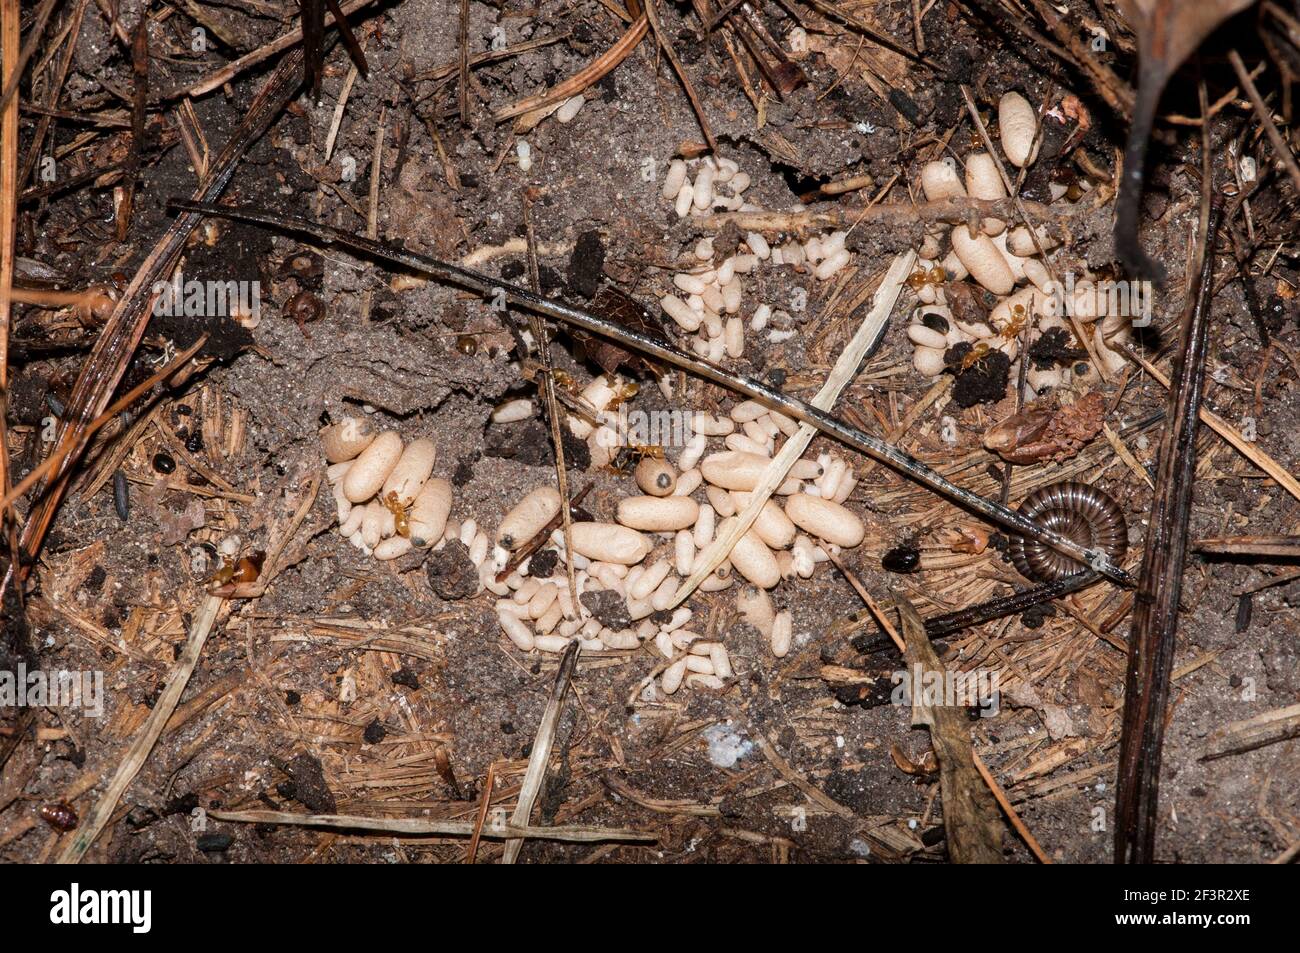 Vadnais Heights, Minnesota. John H. Allison forest. Colony of red ants with cocoon larvae, pupae. Large cocoons will become queen ants and the small c Stock Photo